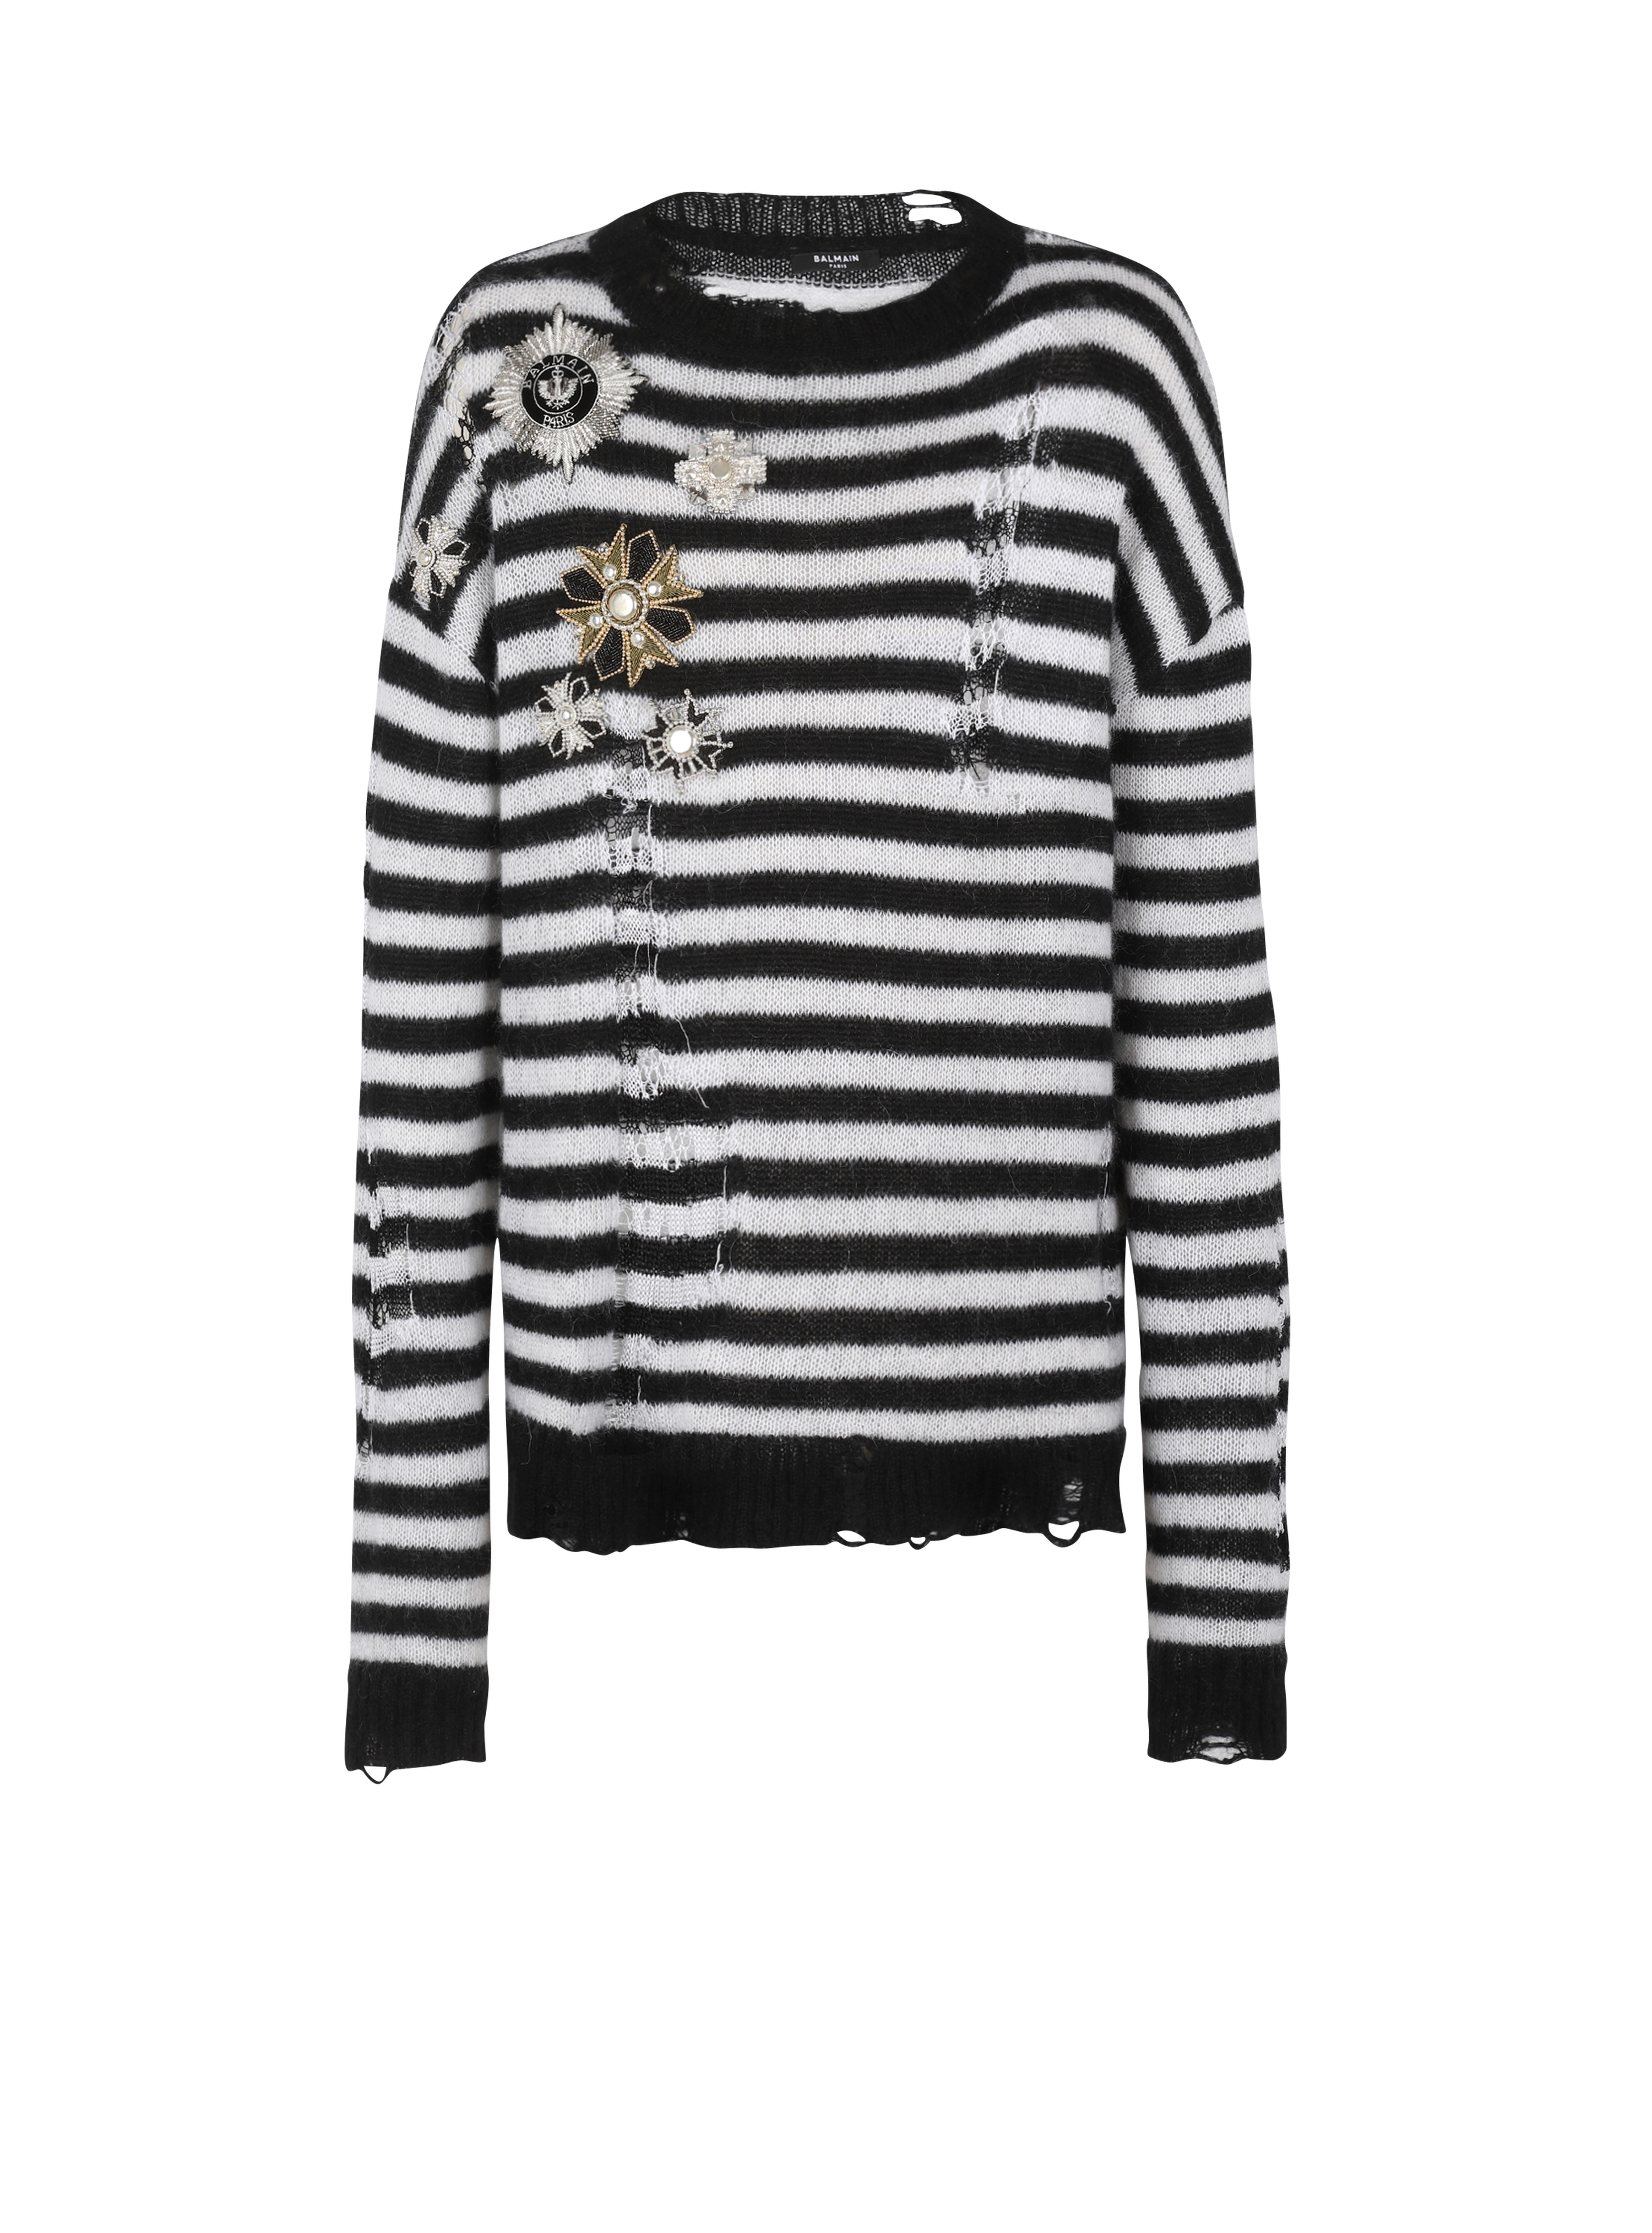 Unisex - Ripped knit nautical sweater with brooches, black